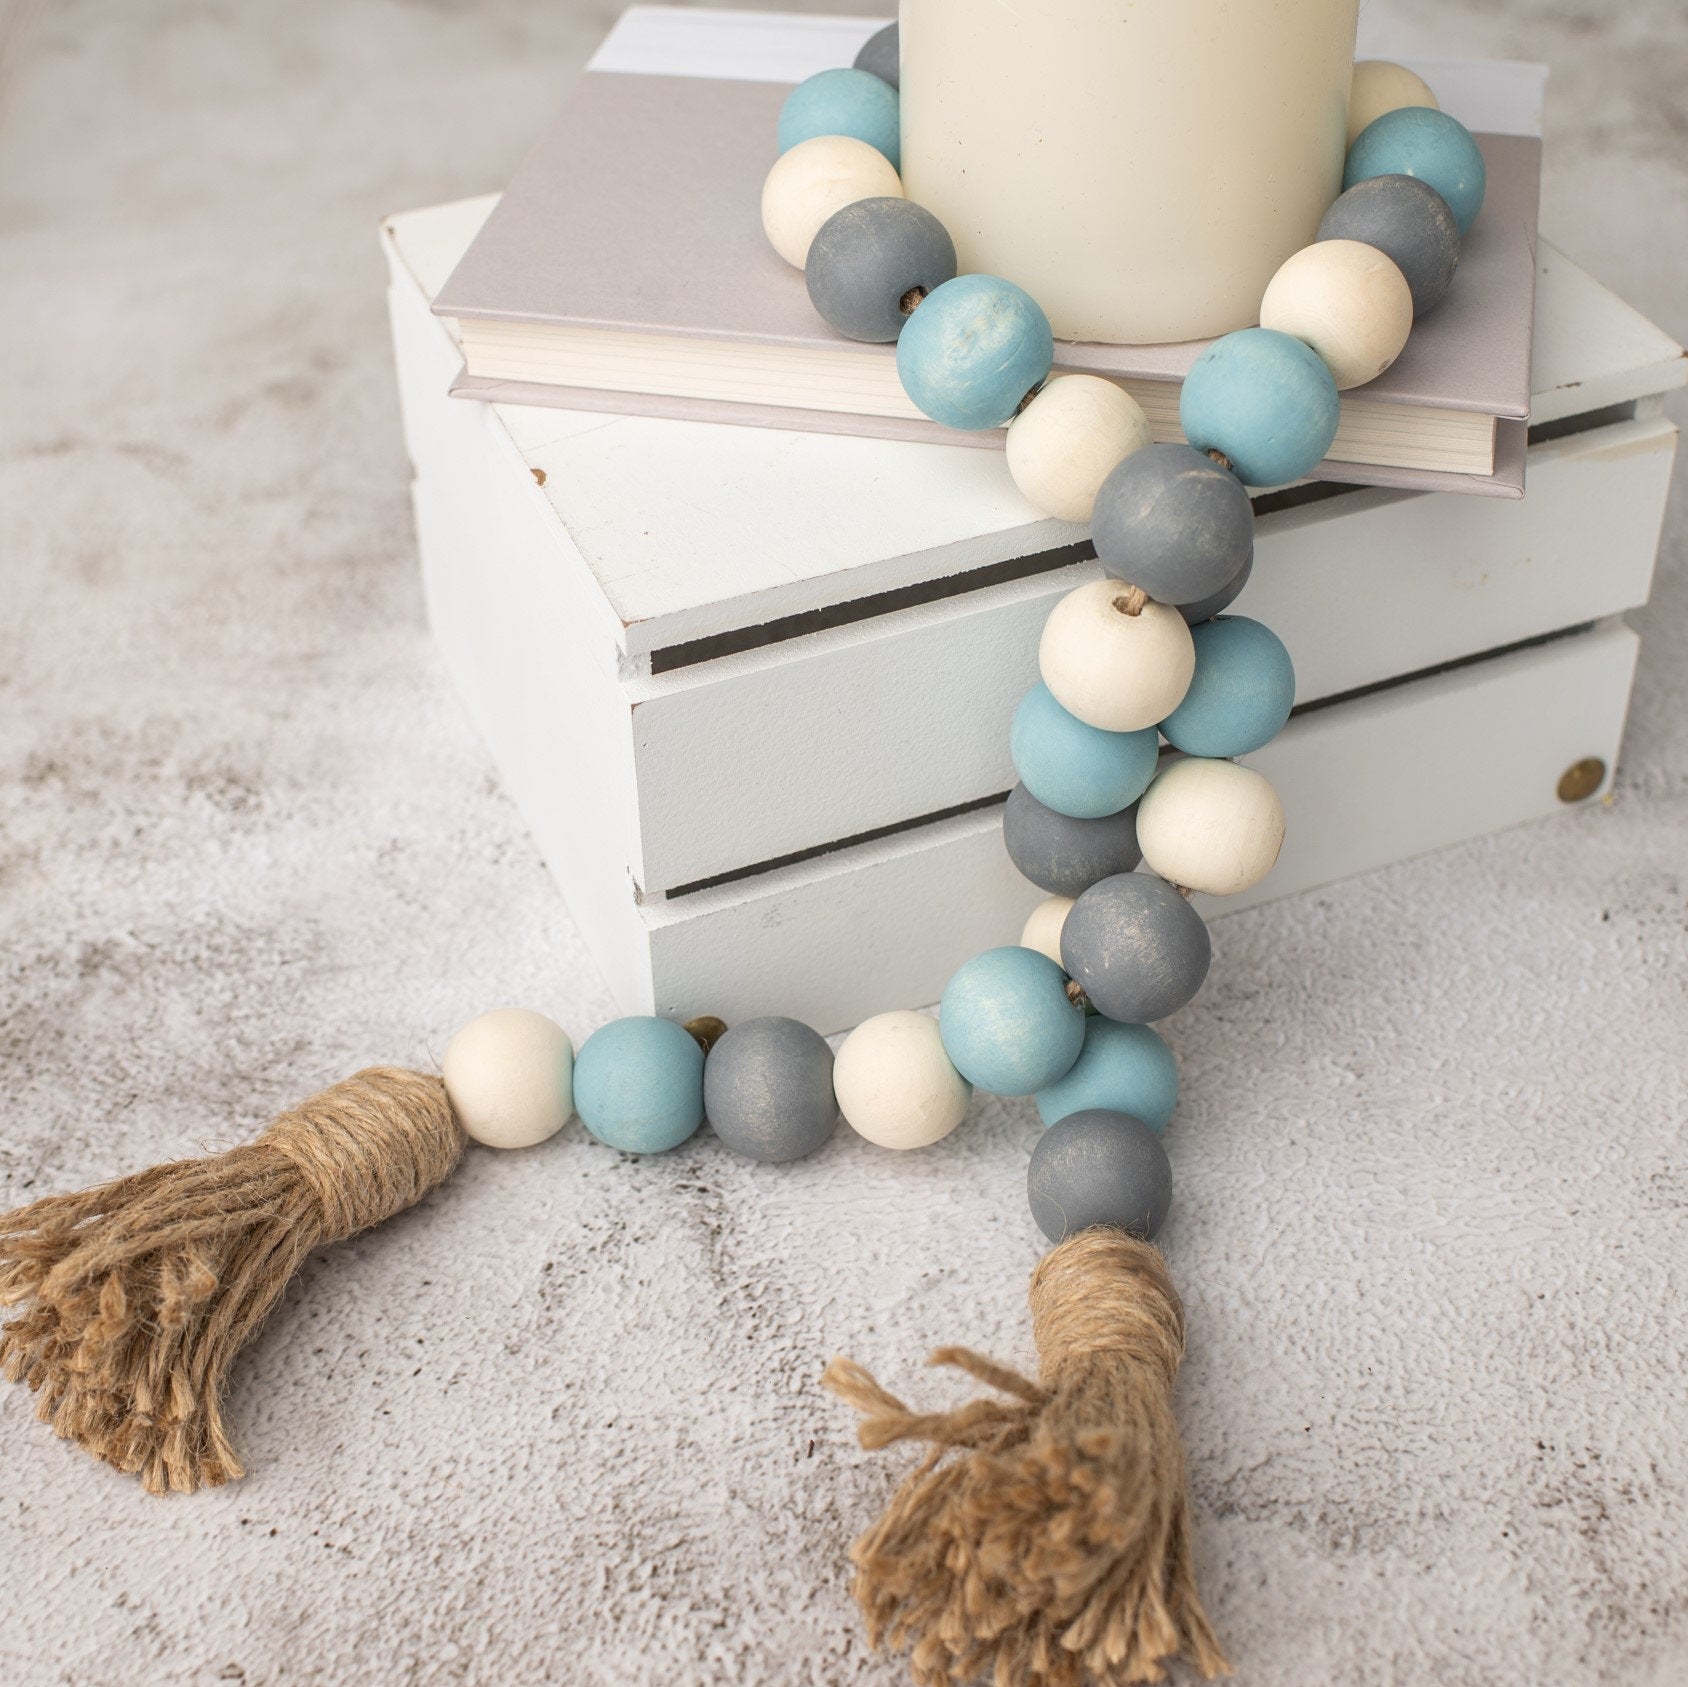 DIY Wood Bead Garland with Tassels - The Turquoise Home